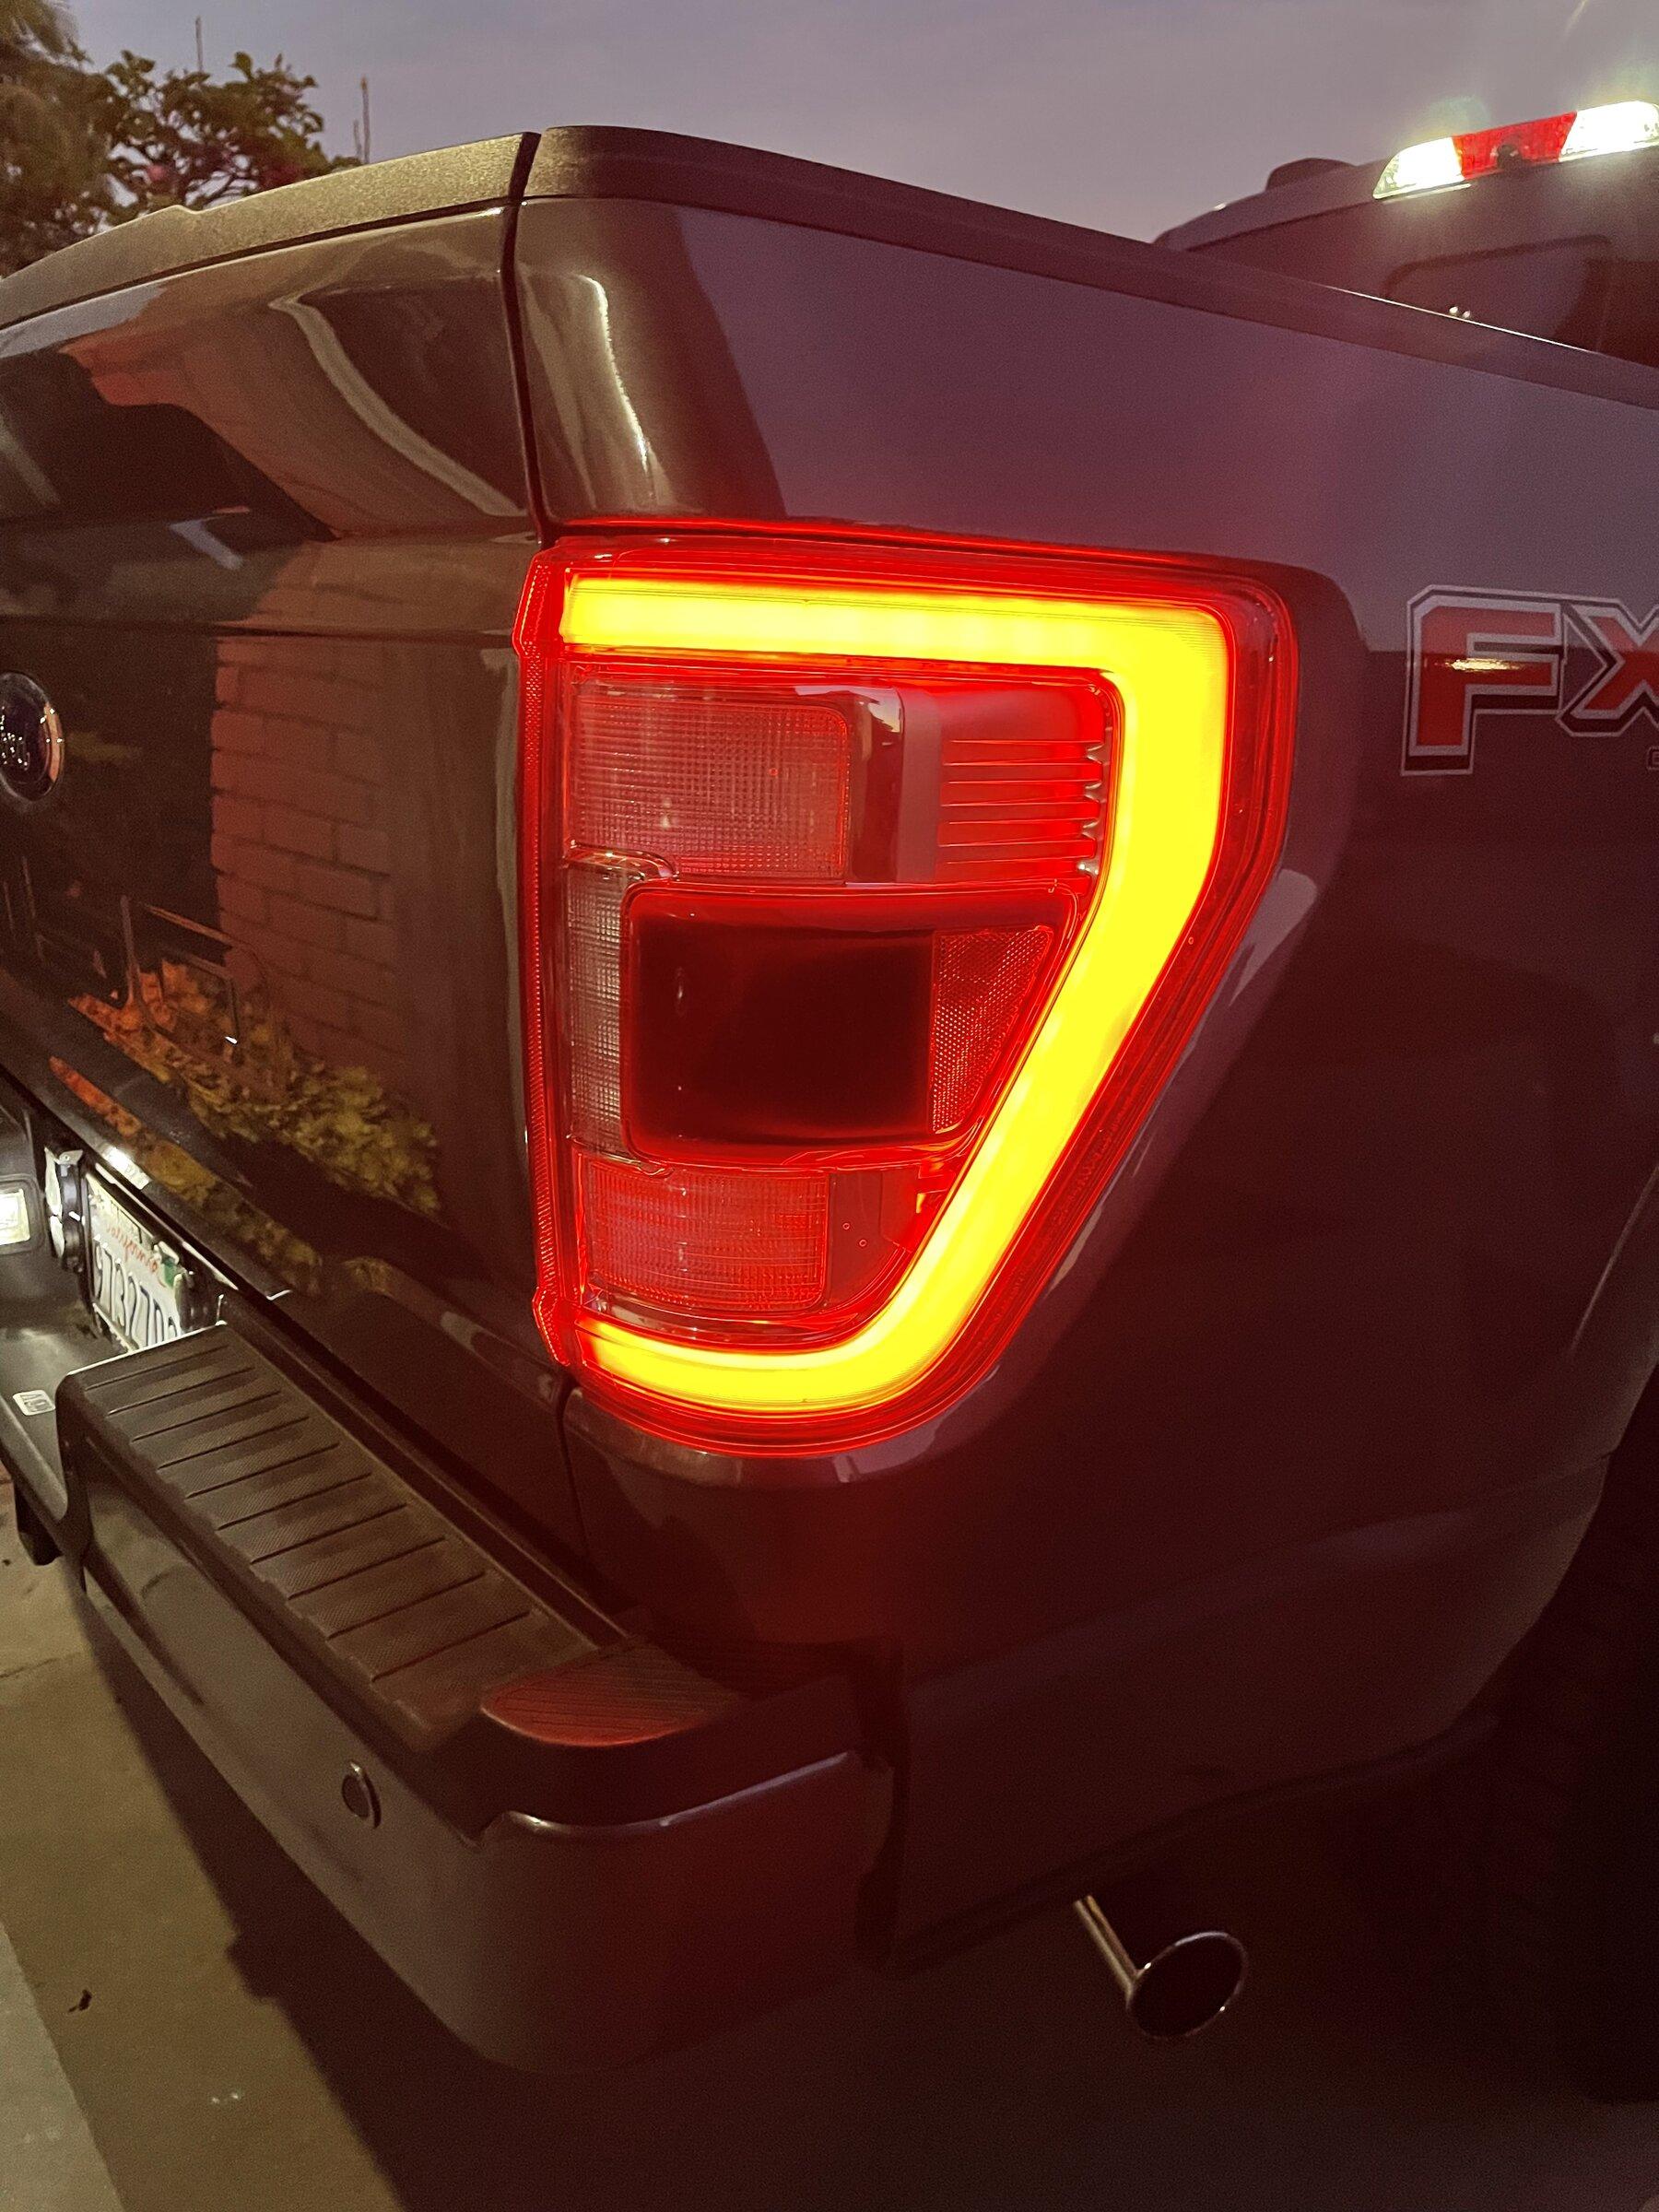 Ford F-150 Lightning Converted from Halogen to LED taillights. DRL mod done too!! 6B3E3139-3CAF-4040-AF33-9C52834C98B2